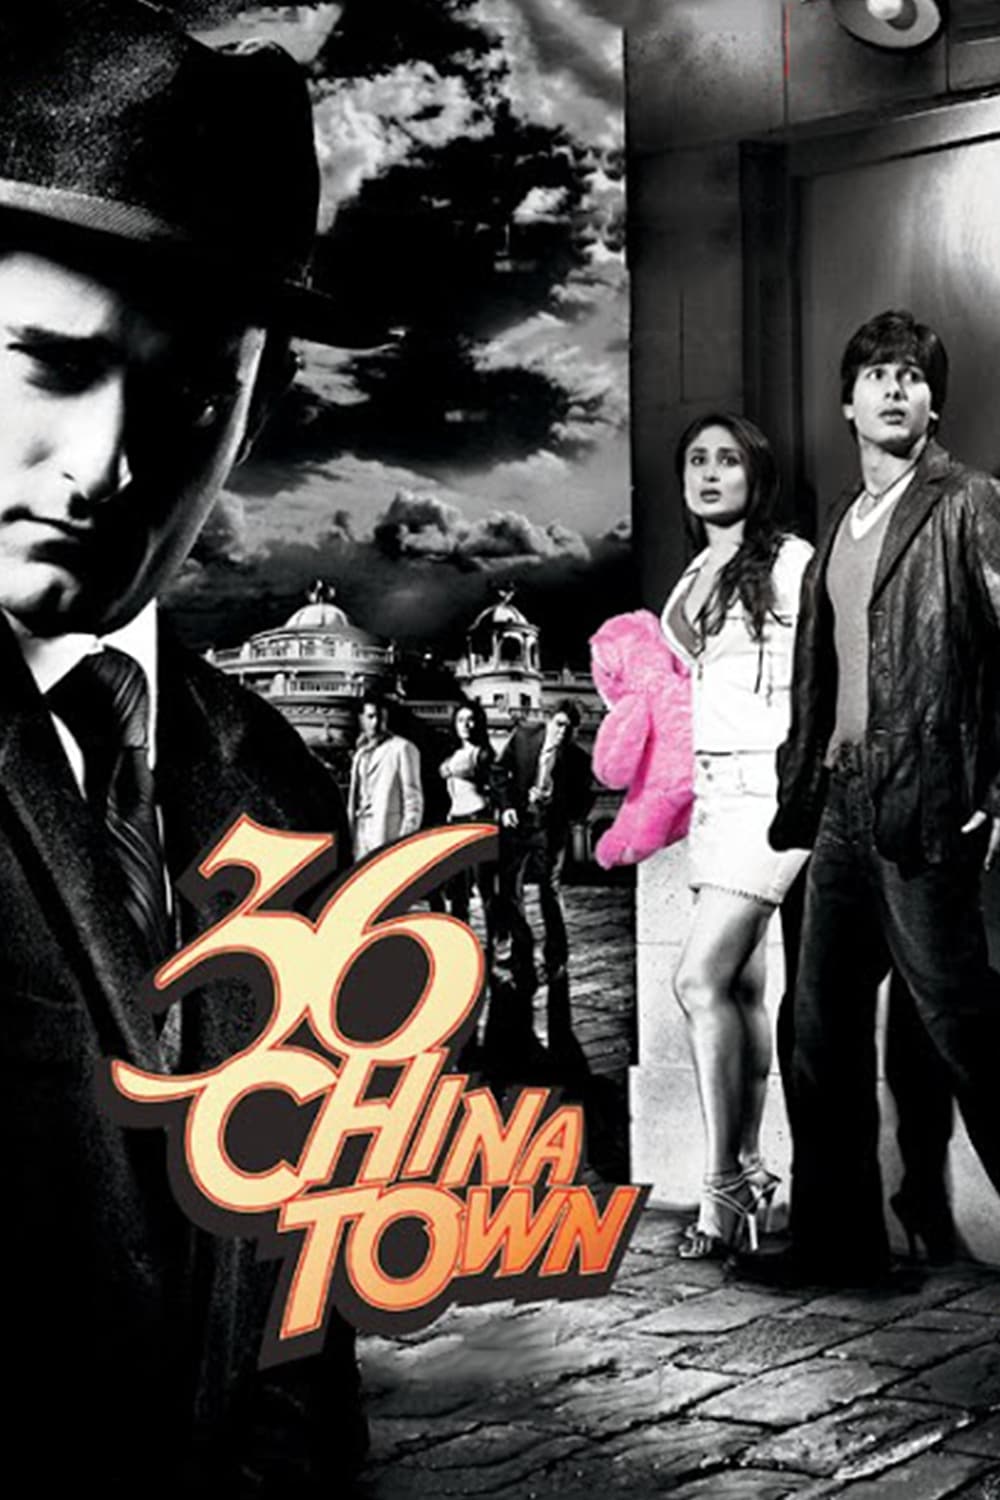 Poster for the movie "36 China Town"